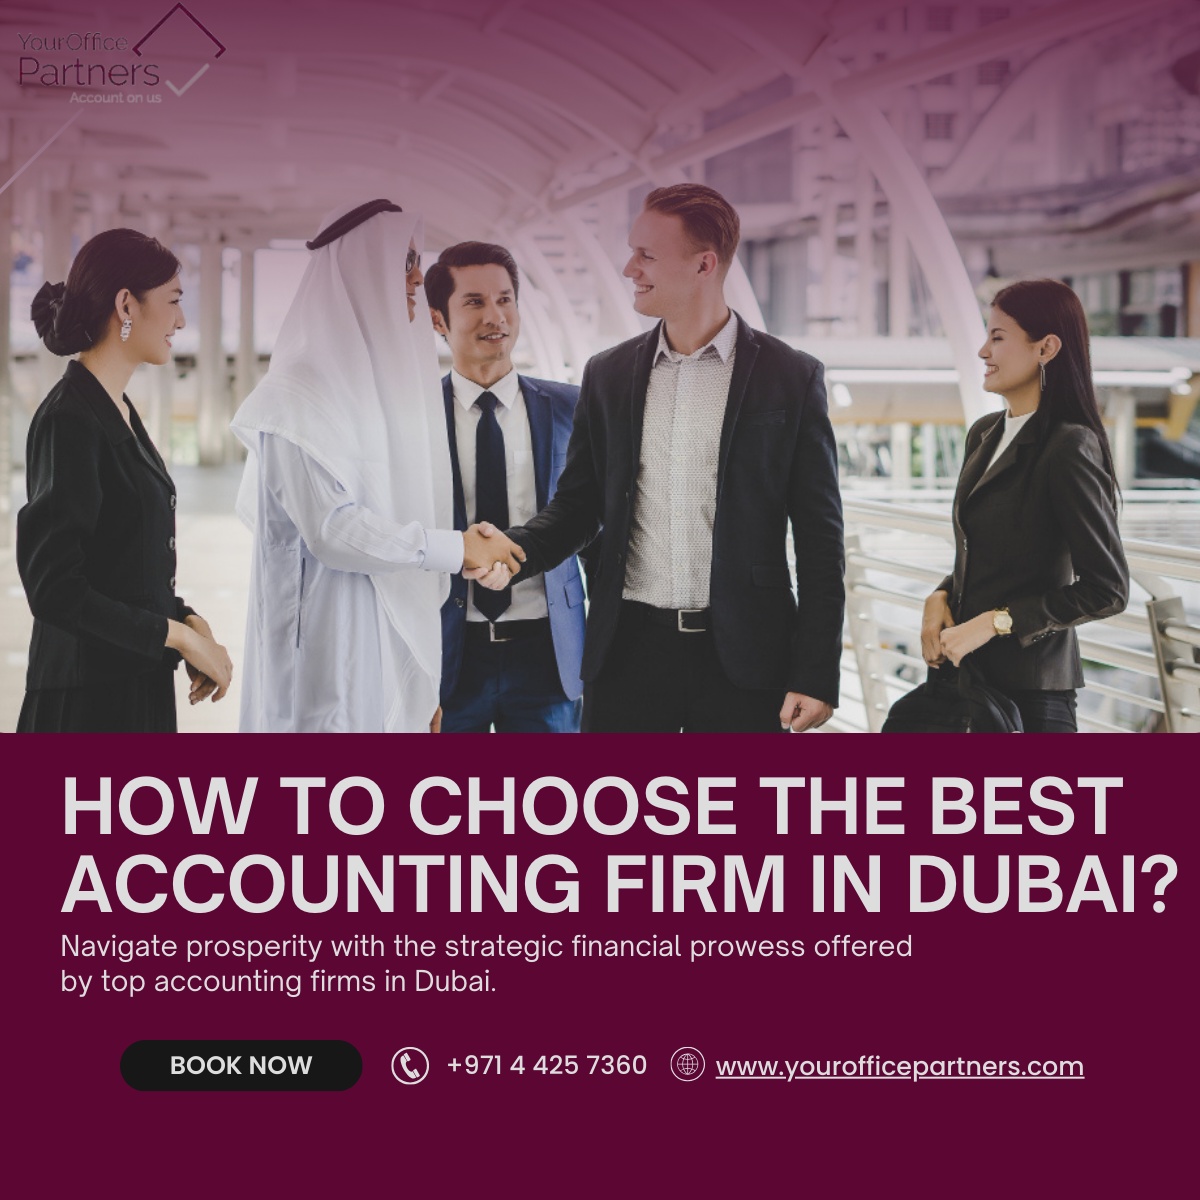 How to Choose the Best Accounting Firm in Dubai?